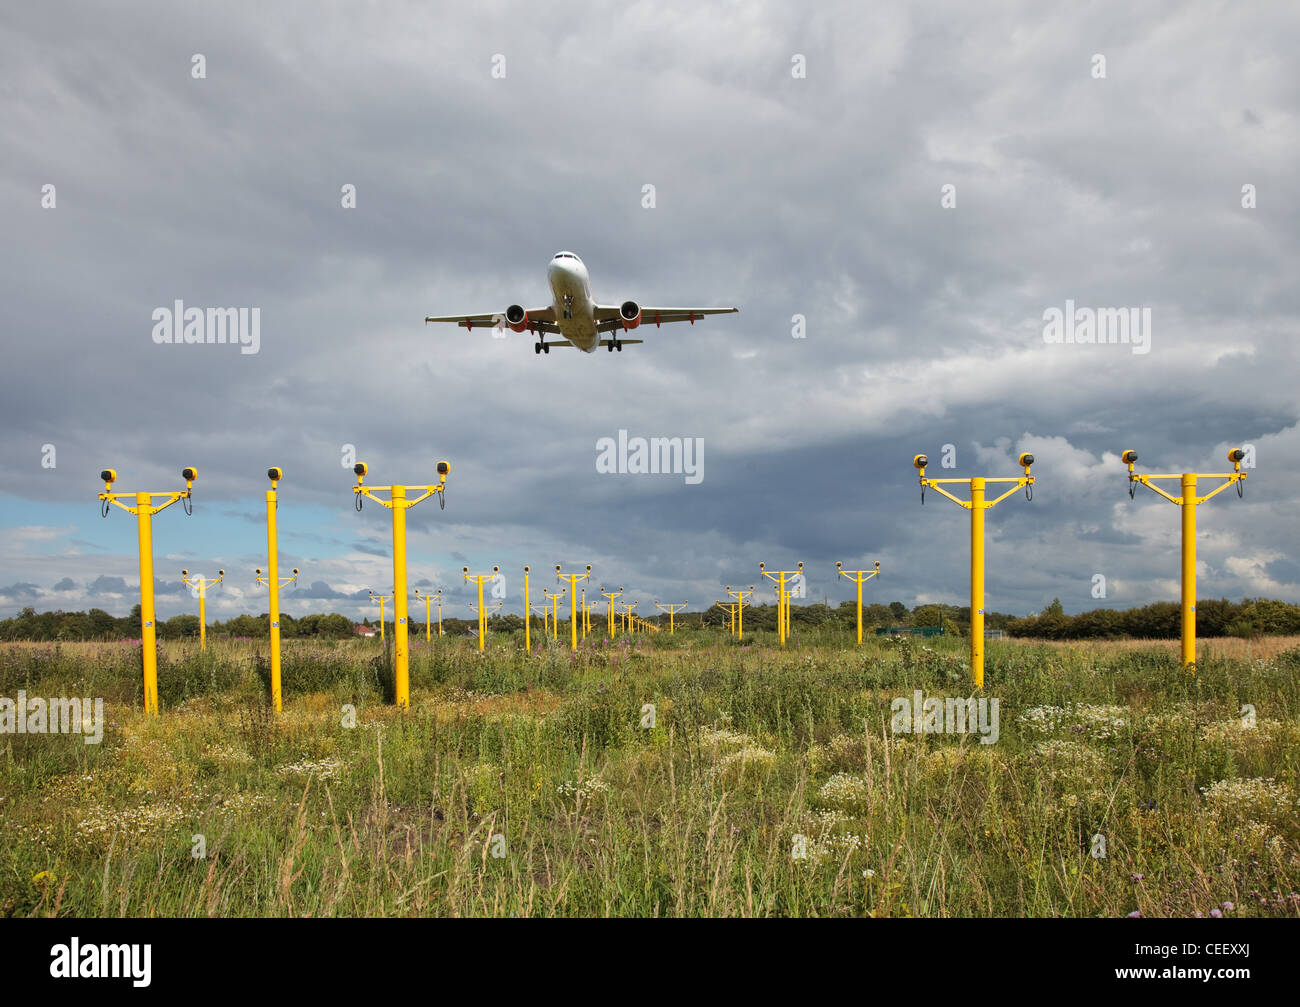 Plane flies low over landing lights on approach to the runway. Stock Photo